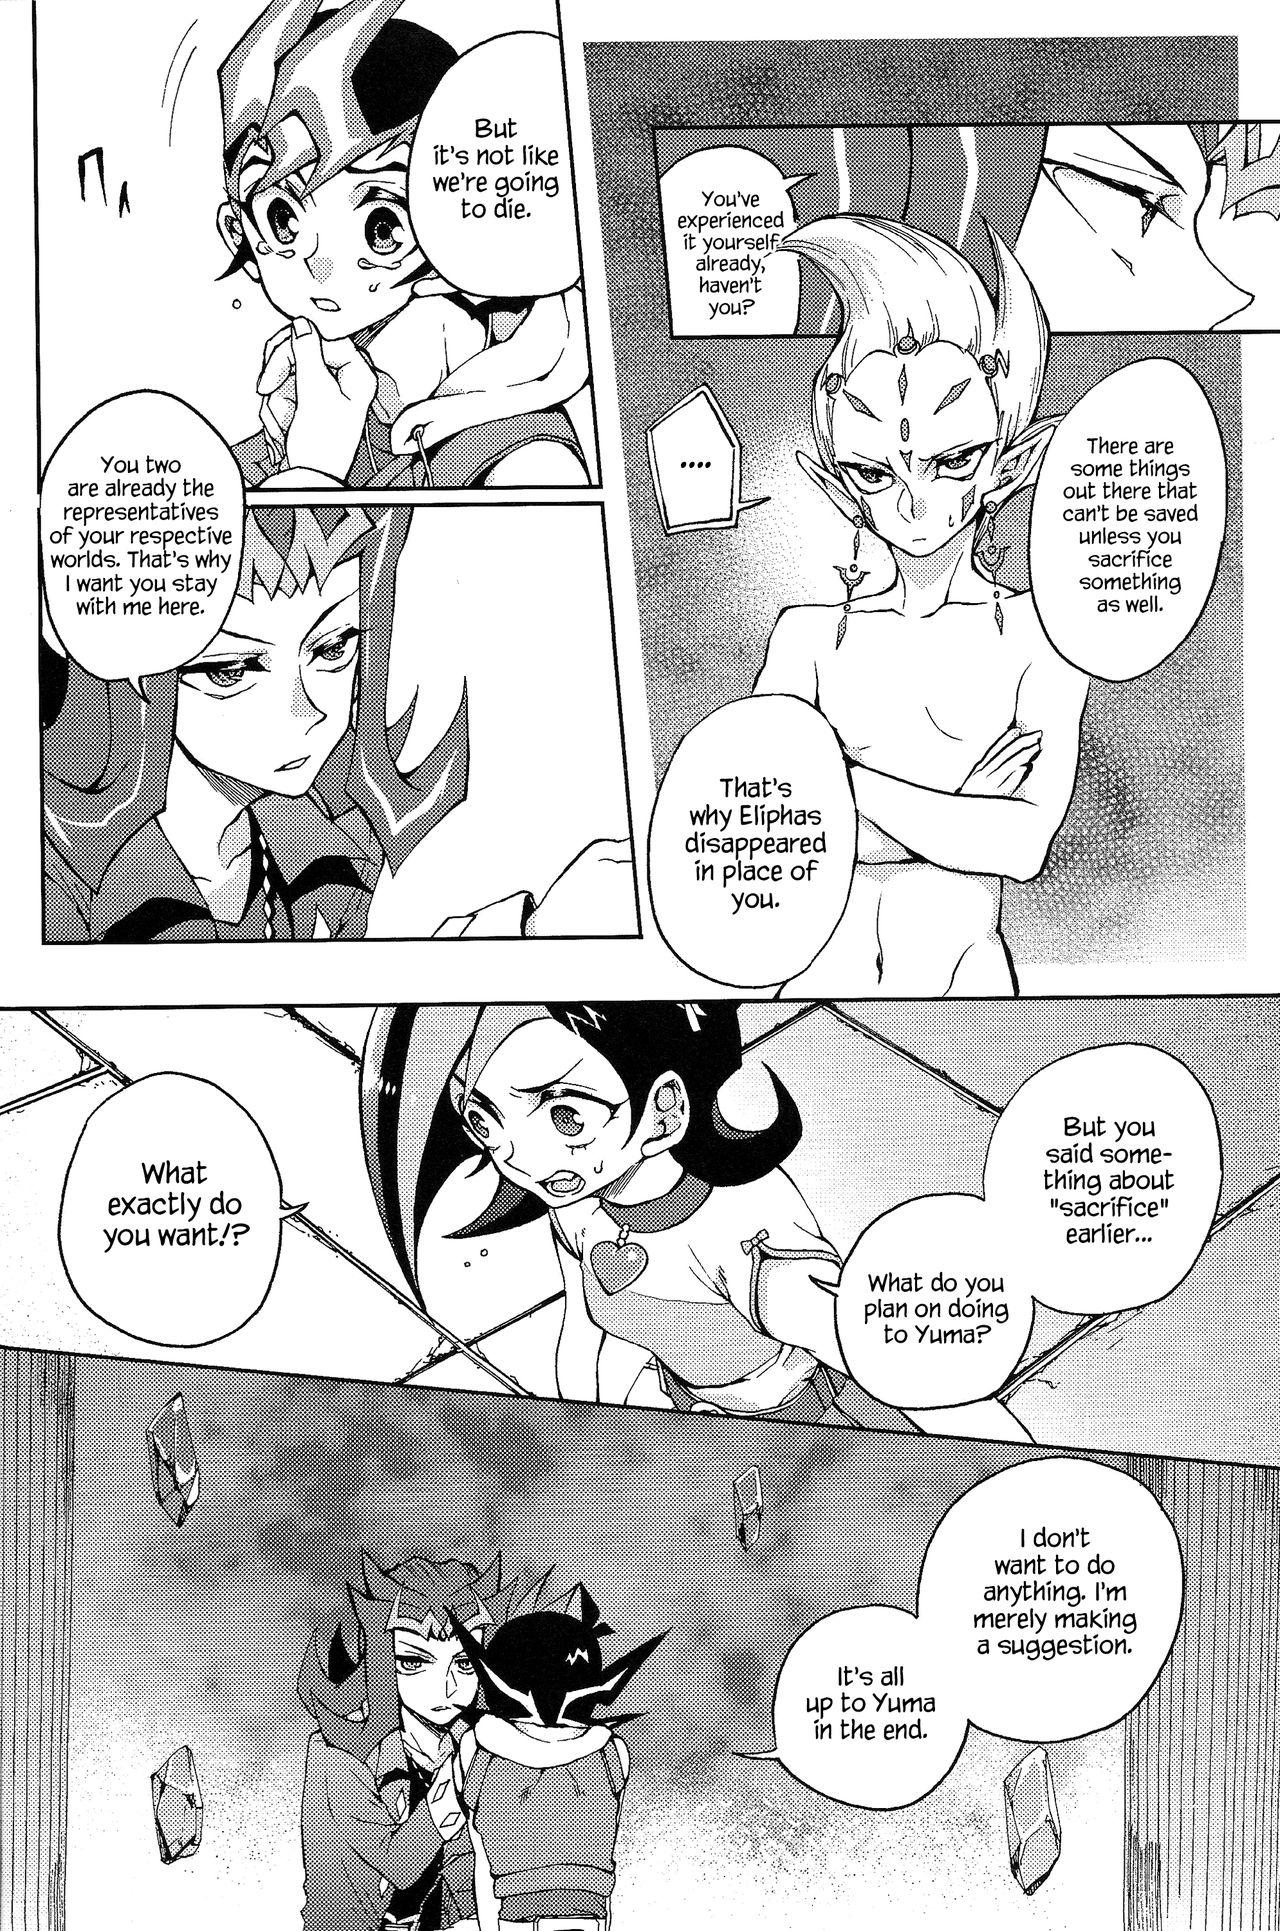 New Ultimate Eden - Yu-gi-oh zexal Office Fuck - Page 11